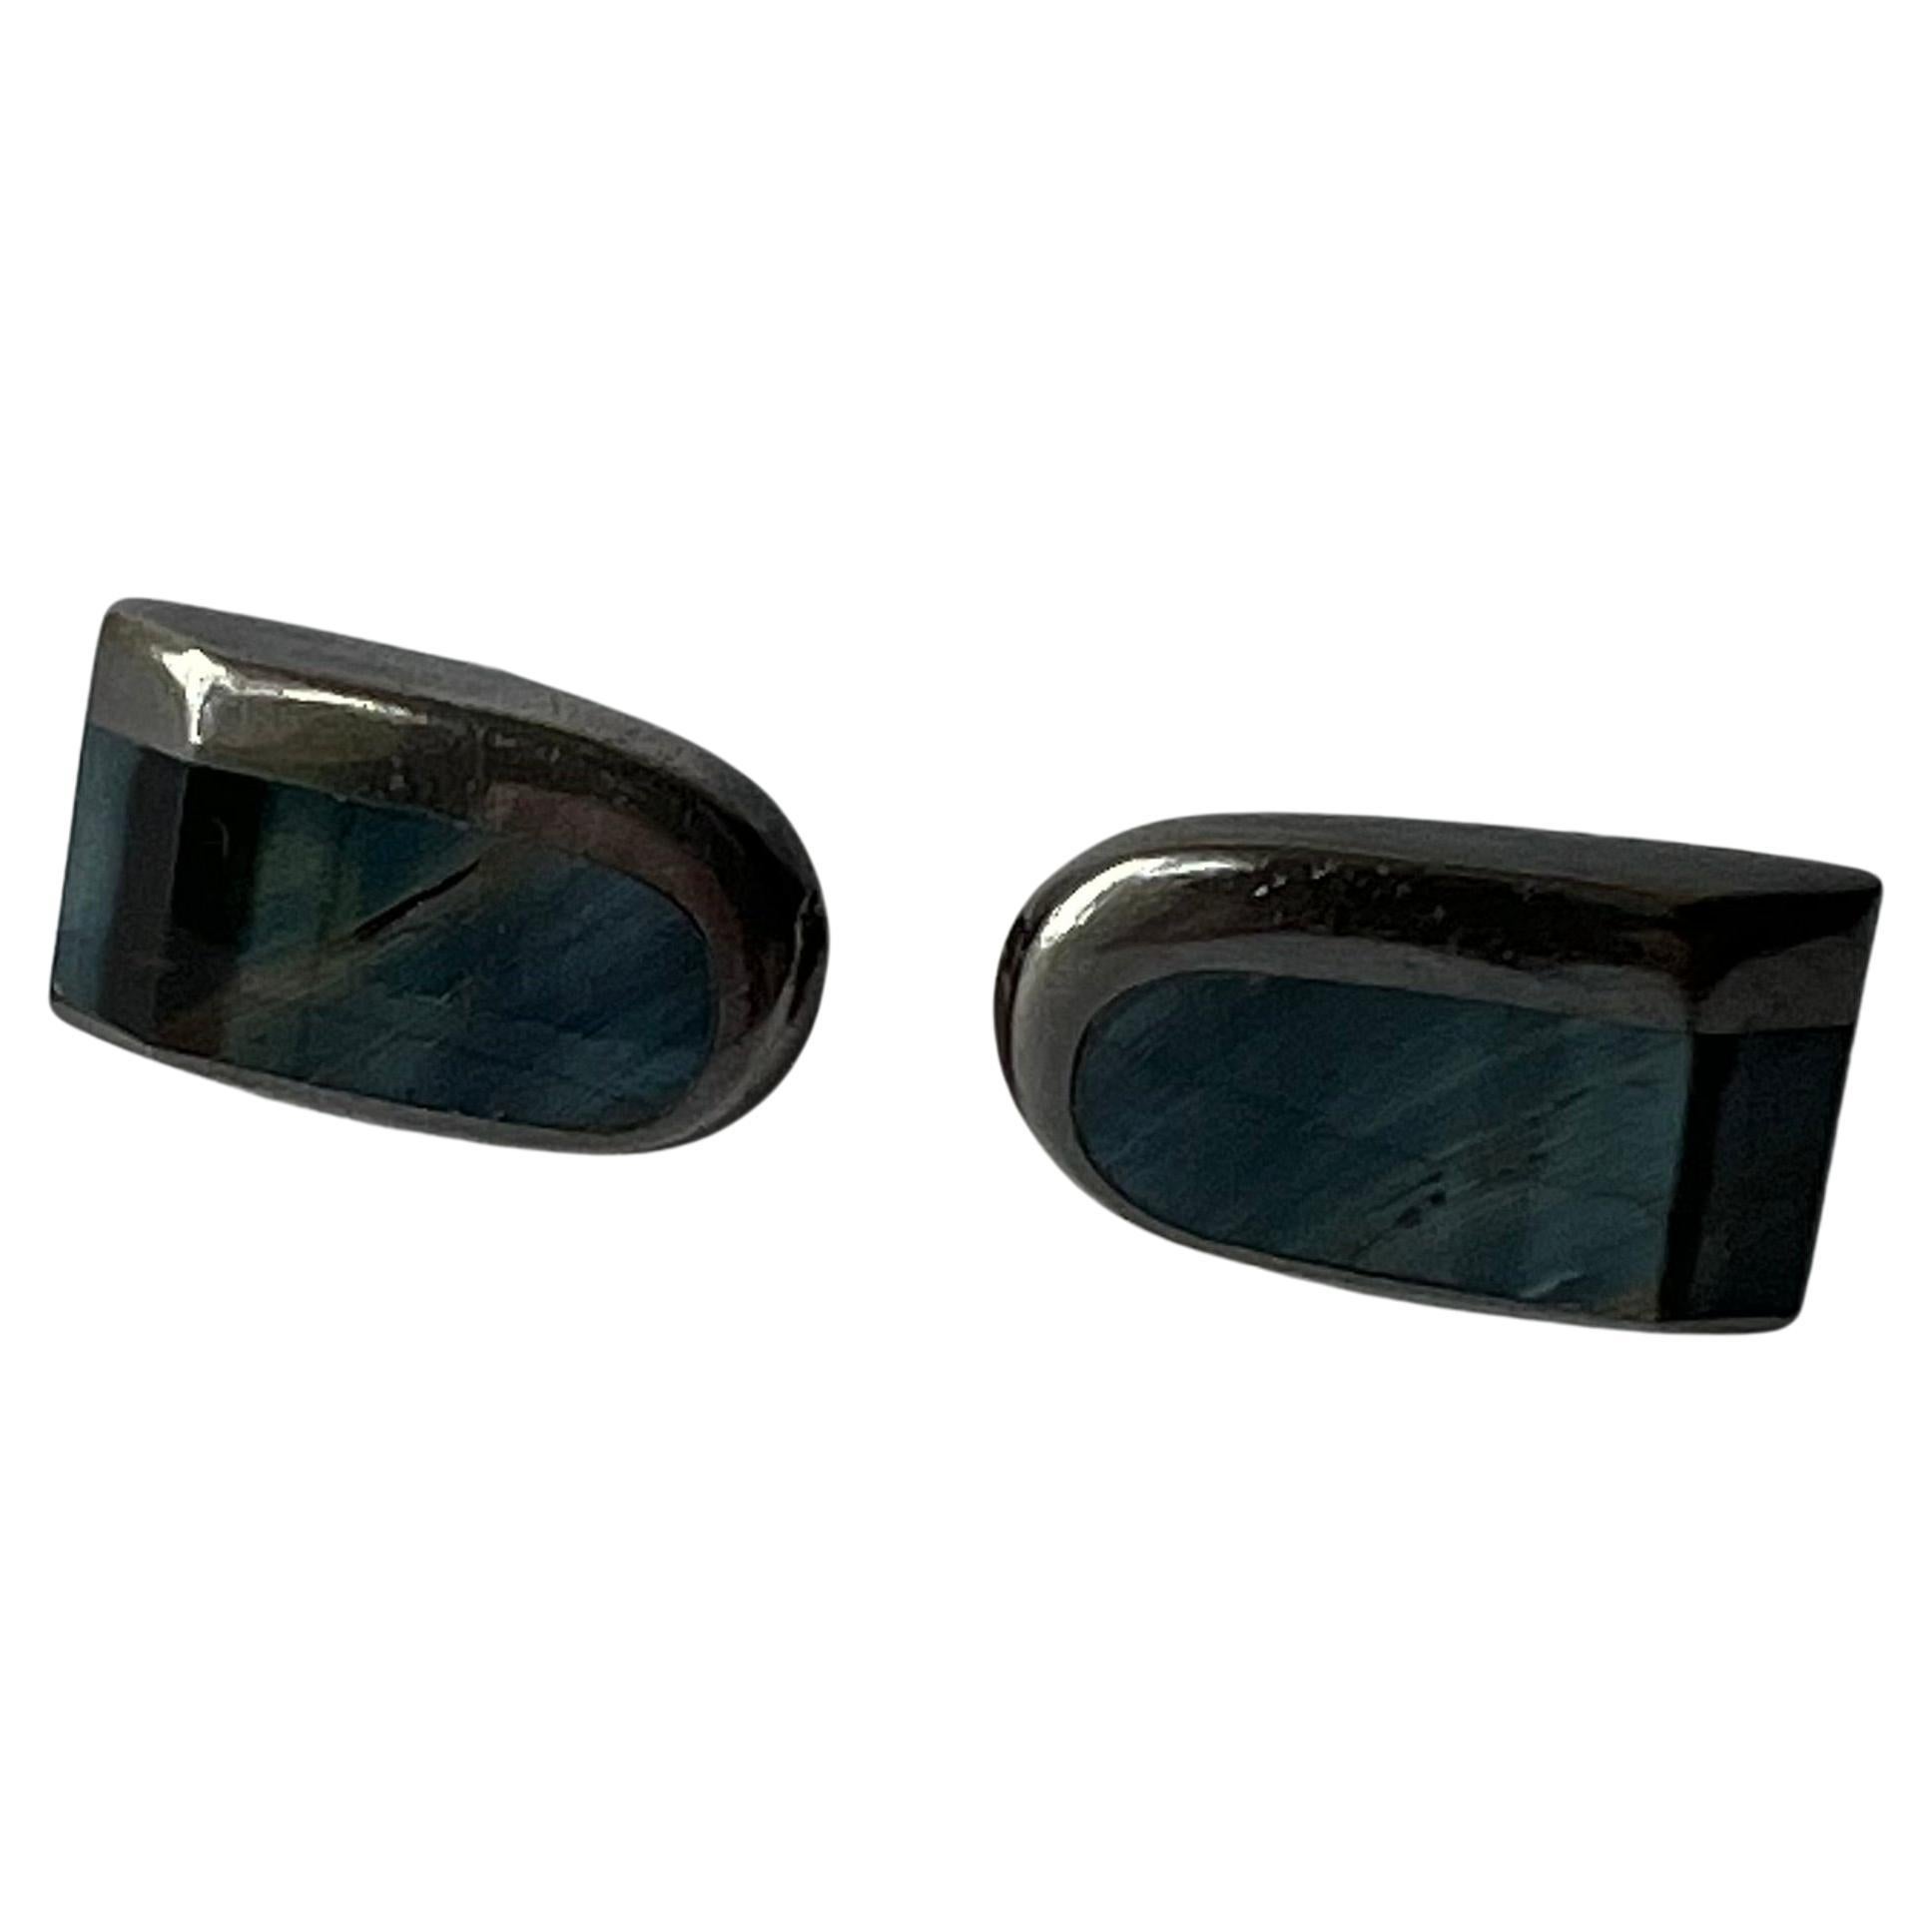 Enrique LeDesma Mexican modern oxidized sterling silver with obsidian inlay cufflinks and tie clip set, circa 1950s.  Cufflinks measure 7/8